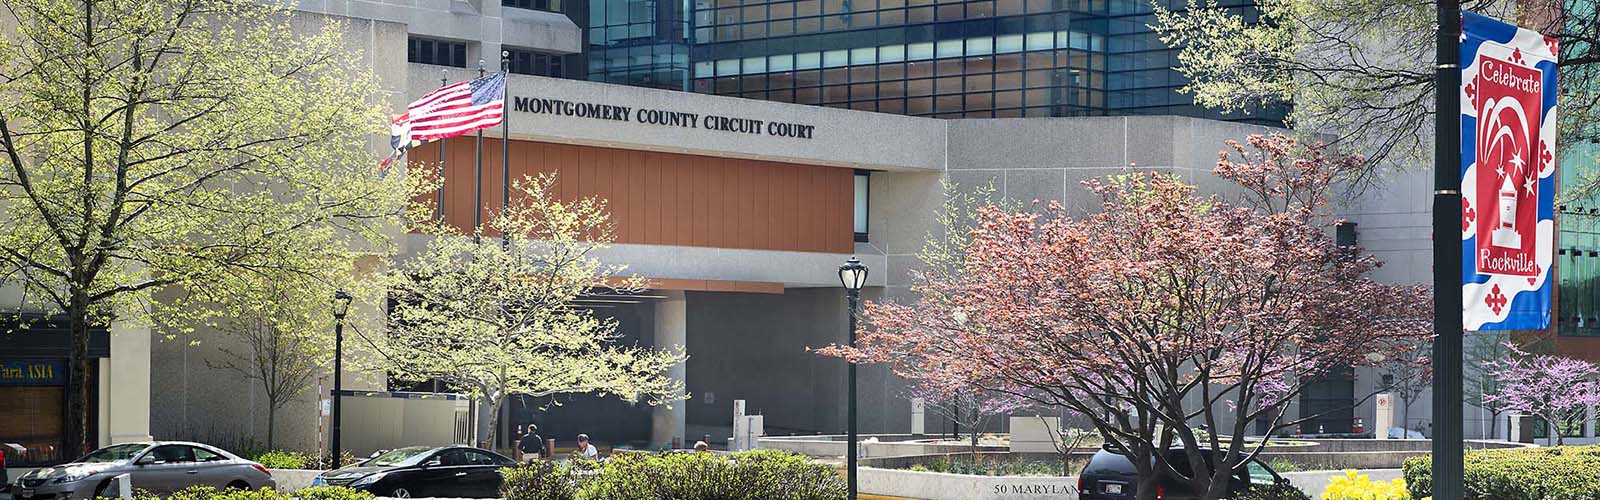 Home Montgomery County MD Circuit Court